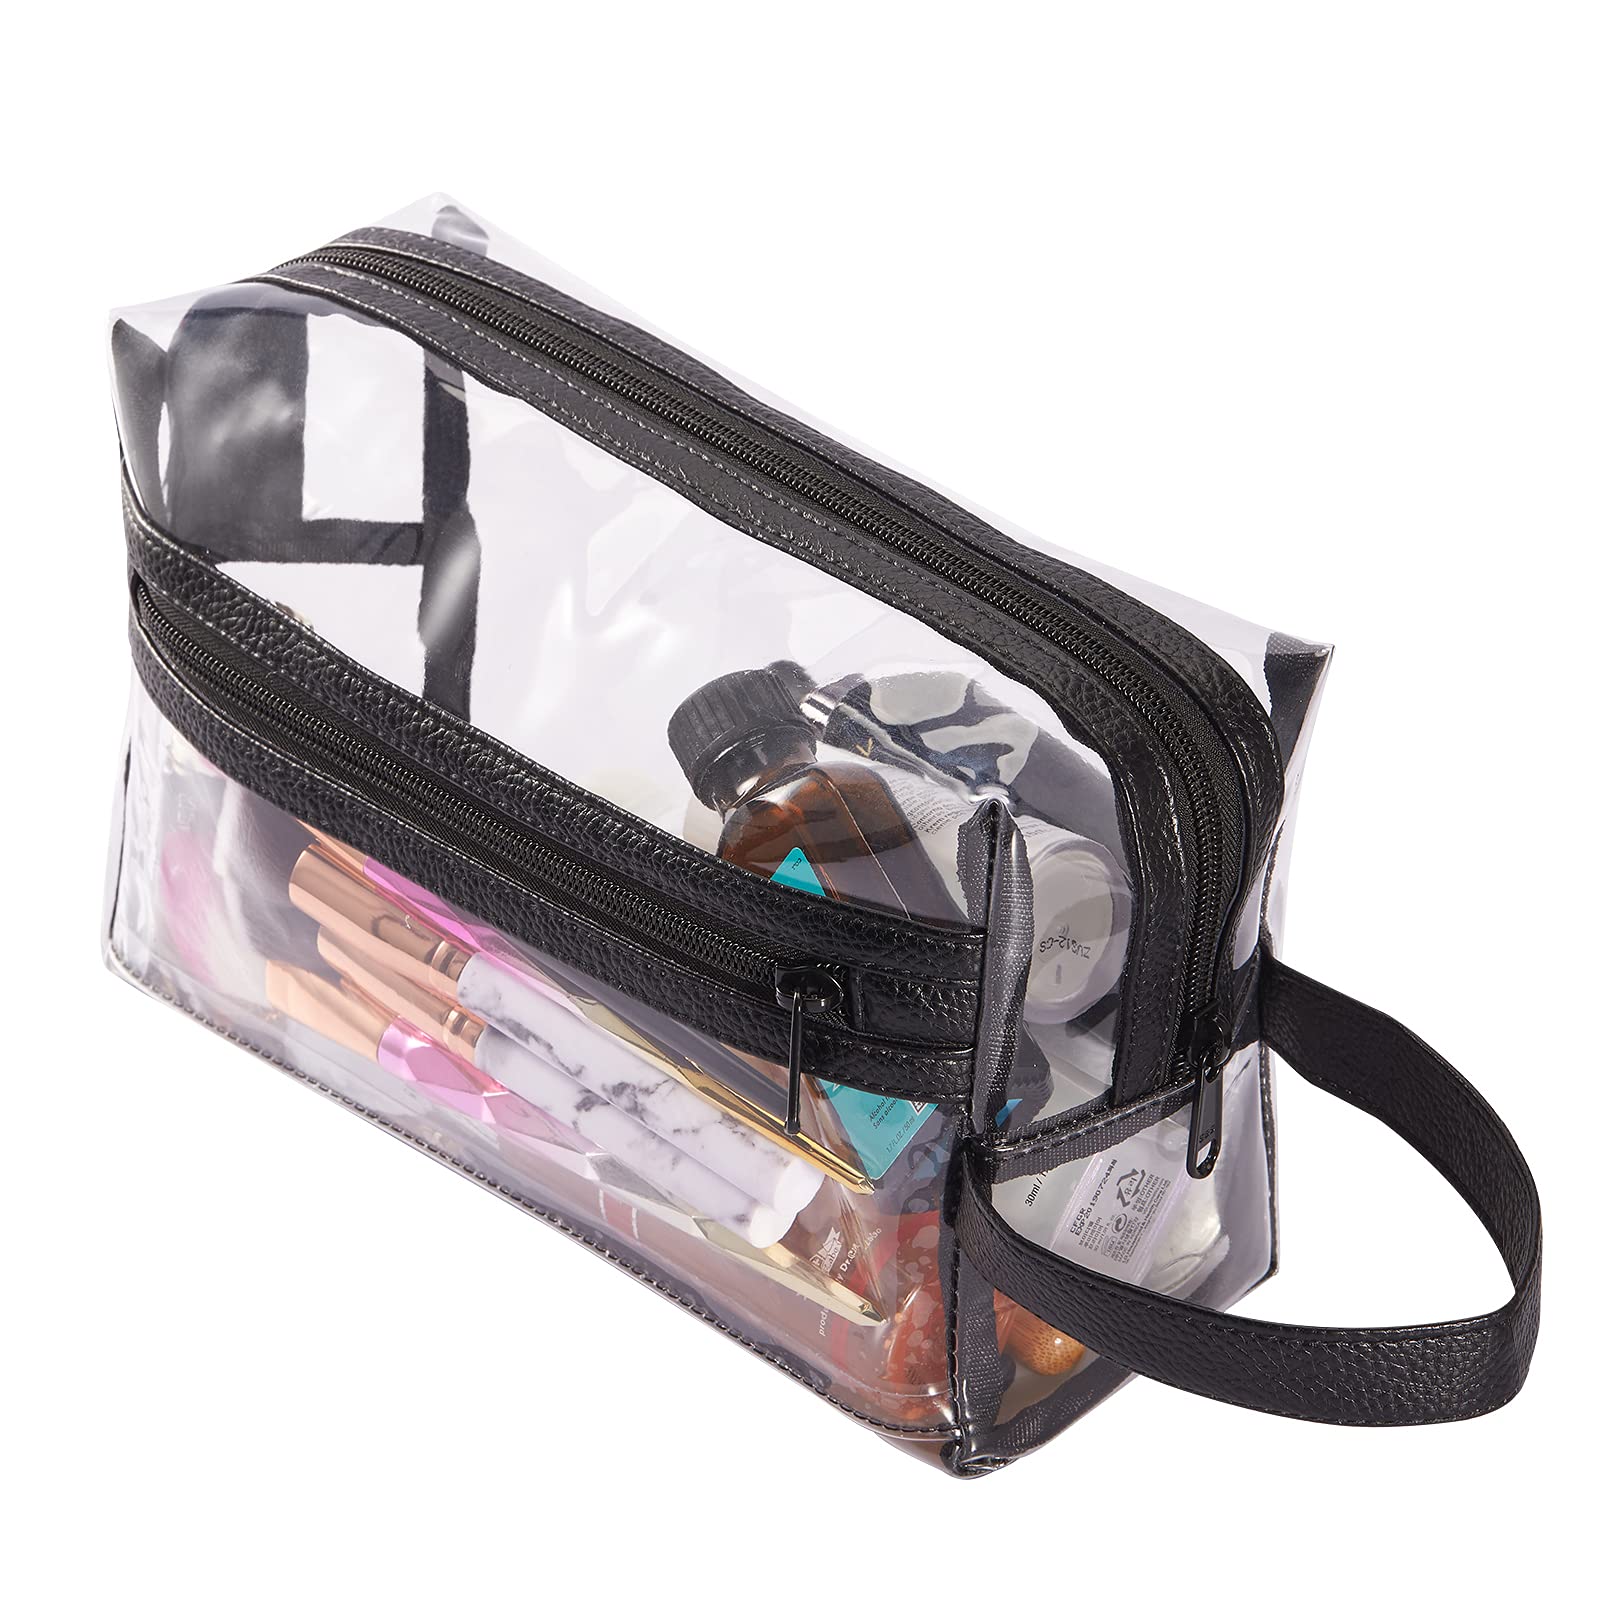 Heavy Duty Clear Travel Toiletry Makeup Bags Transparent Shaving Bag Water Resistant Cosmetic Bag Organizer Pouch with Zipper and Handle